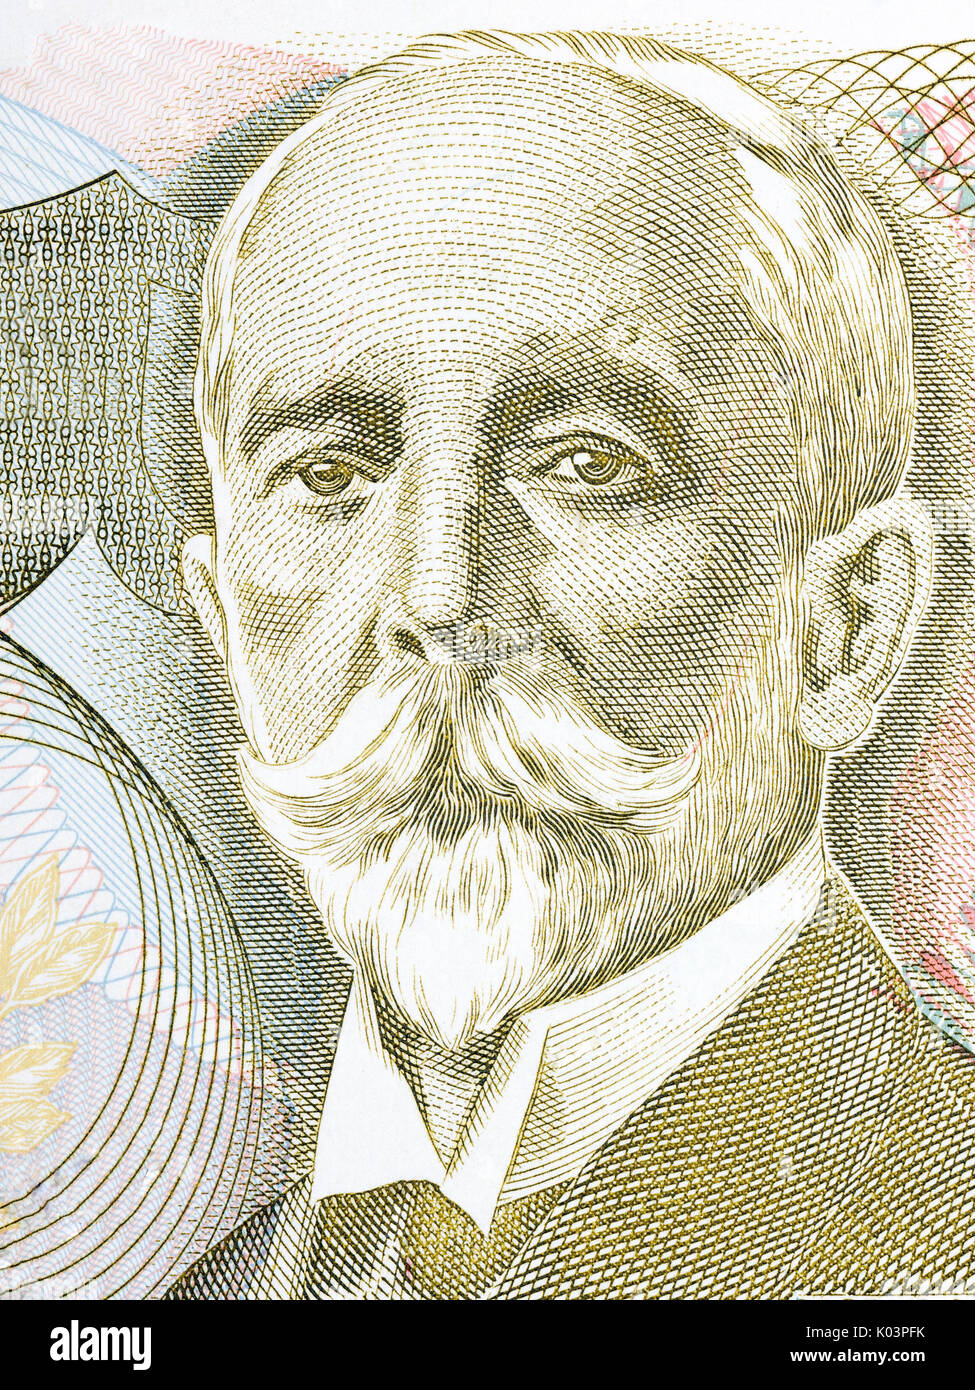 Gaspar Ortuno Y Ors portrait from Costa Rican money Stock Photo